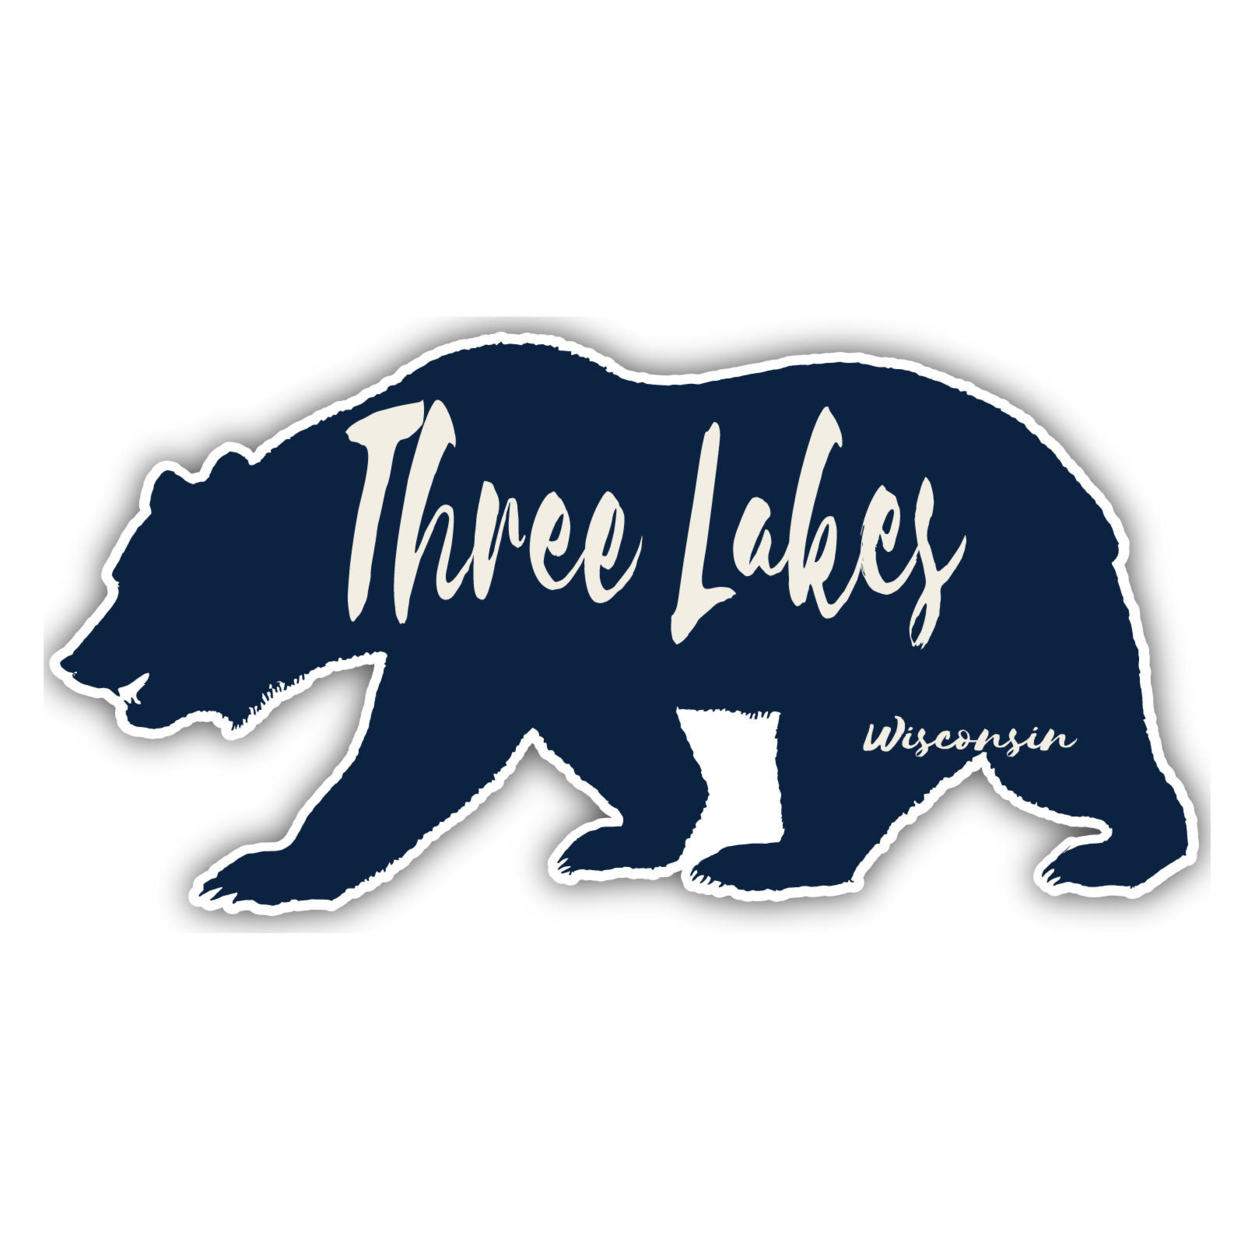 Three Lakes Wisconsin Souvenir Decorative Stickers (Choose Theme And Size) - Single Unit, 4-Inch, Bear